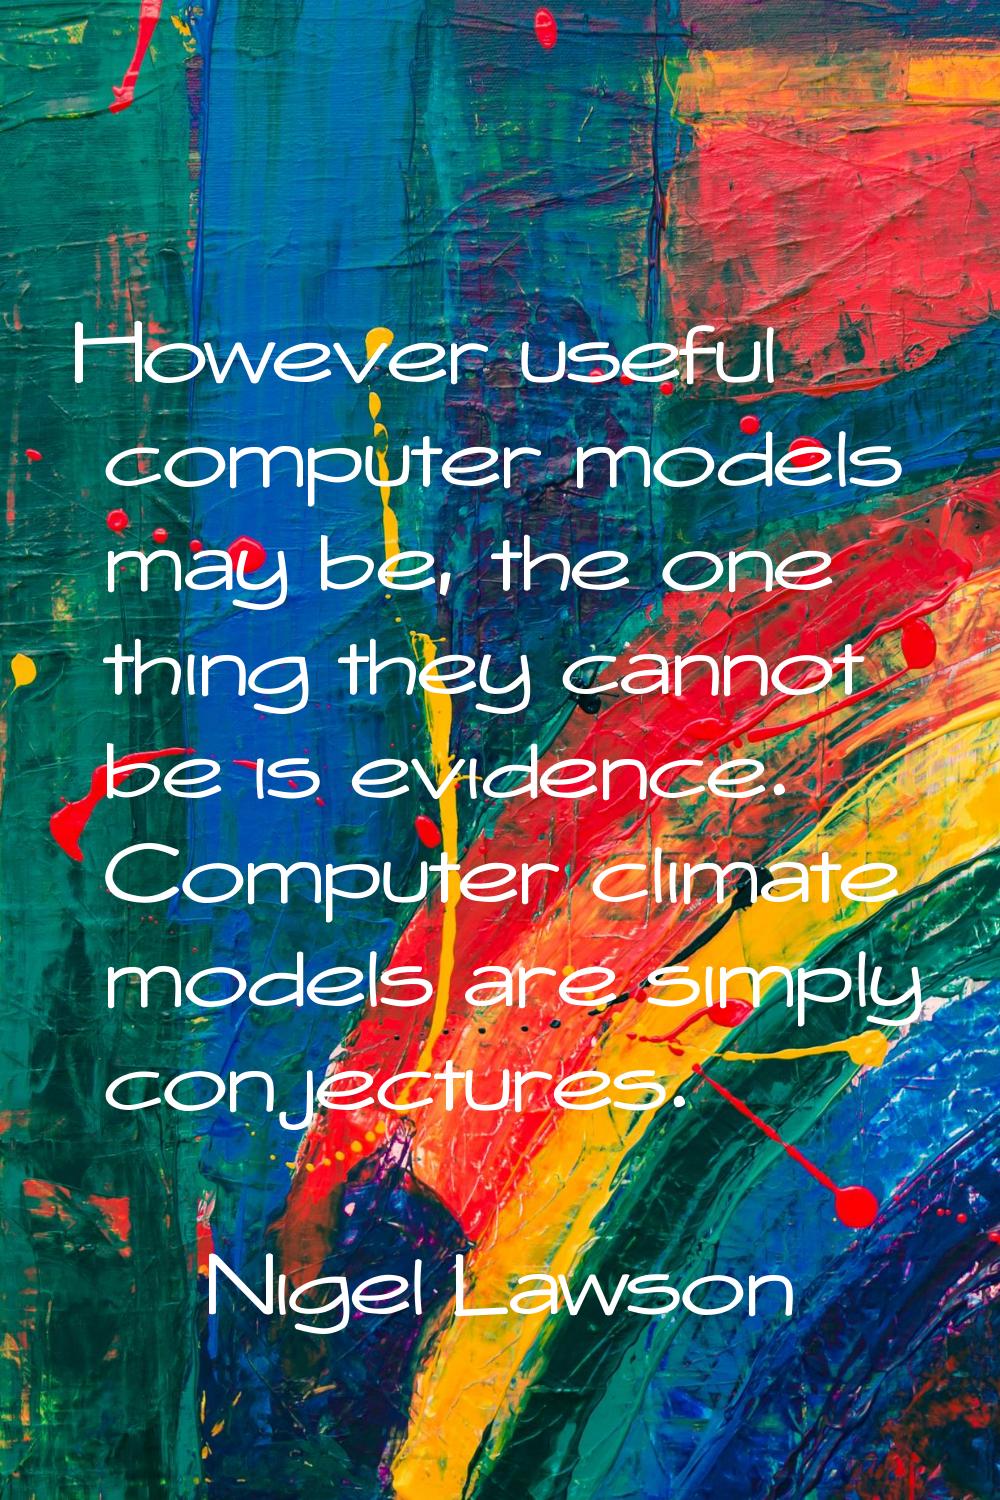 However useful computer models may be, the one thing they cannot be is evidence. Computer climate m